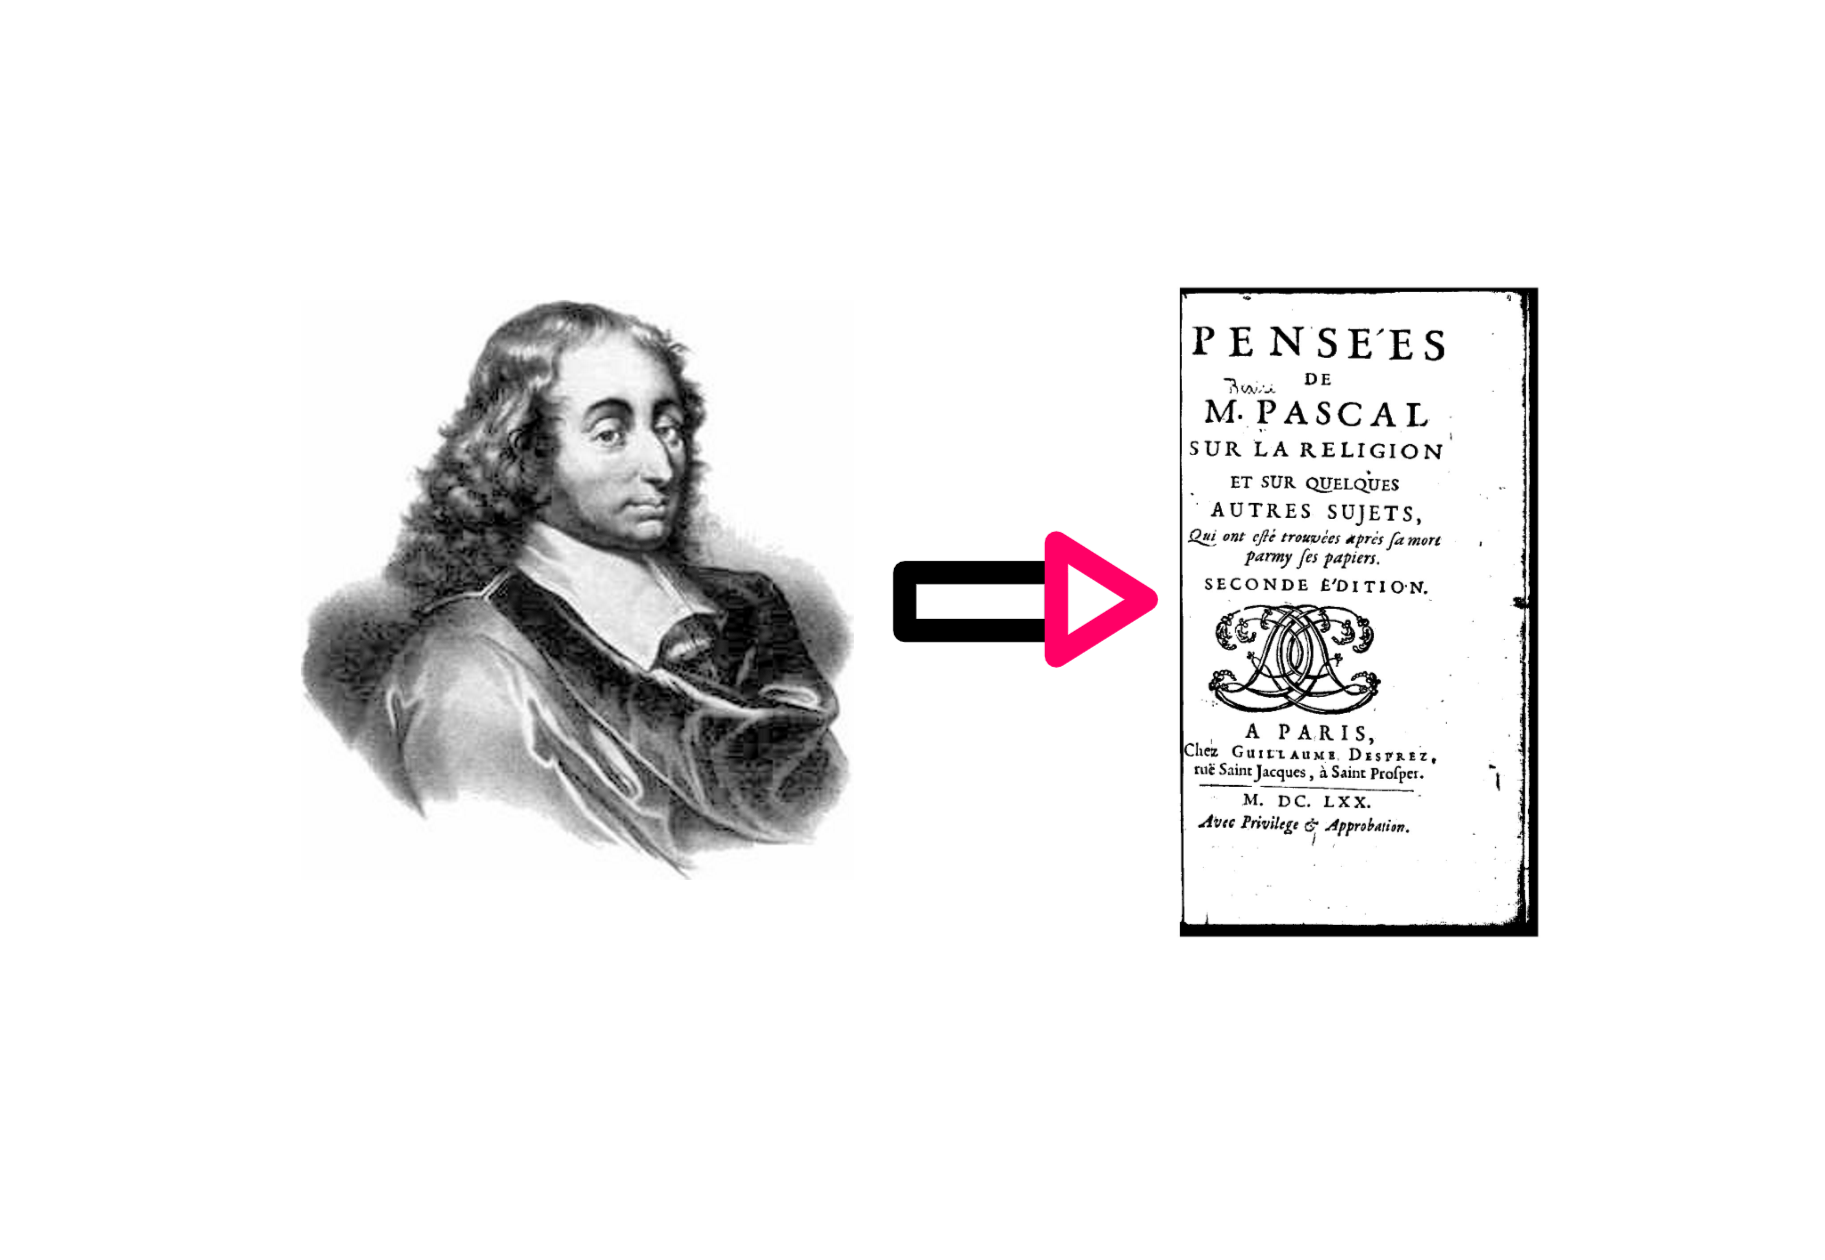 How To Really Understand Pascal's Wager - An image showing a portrait of Blaise Pascal on the left and the second edition of Pascal's Pensées on the right. At the centre is an arrow pointing from left to right.